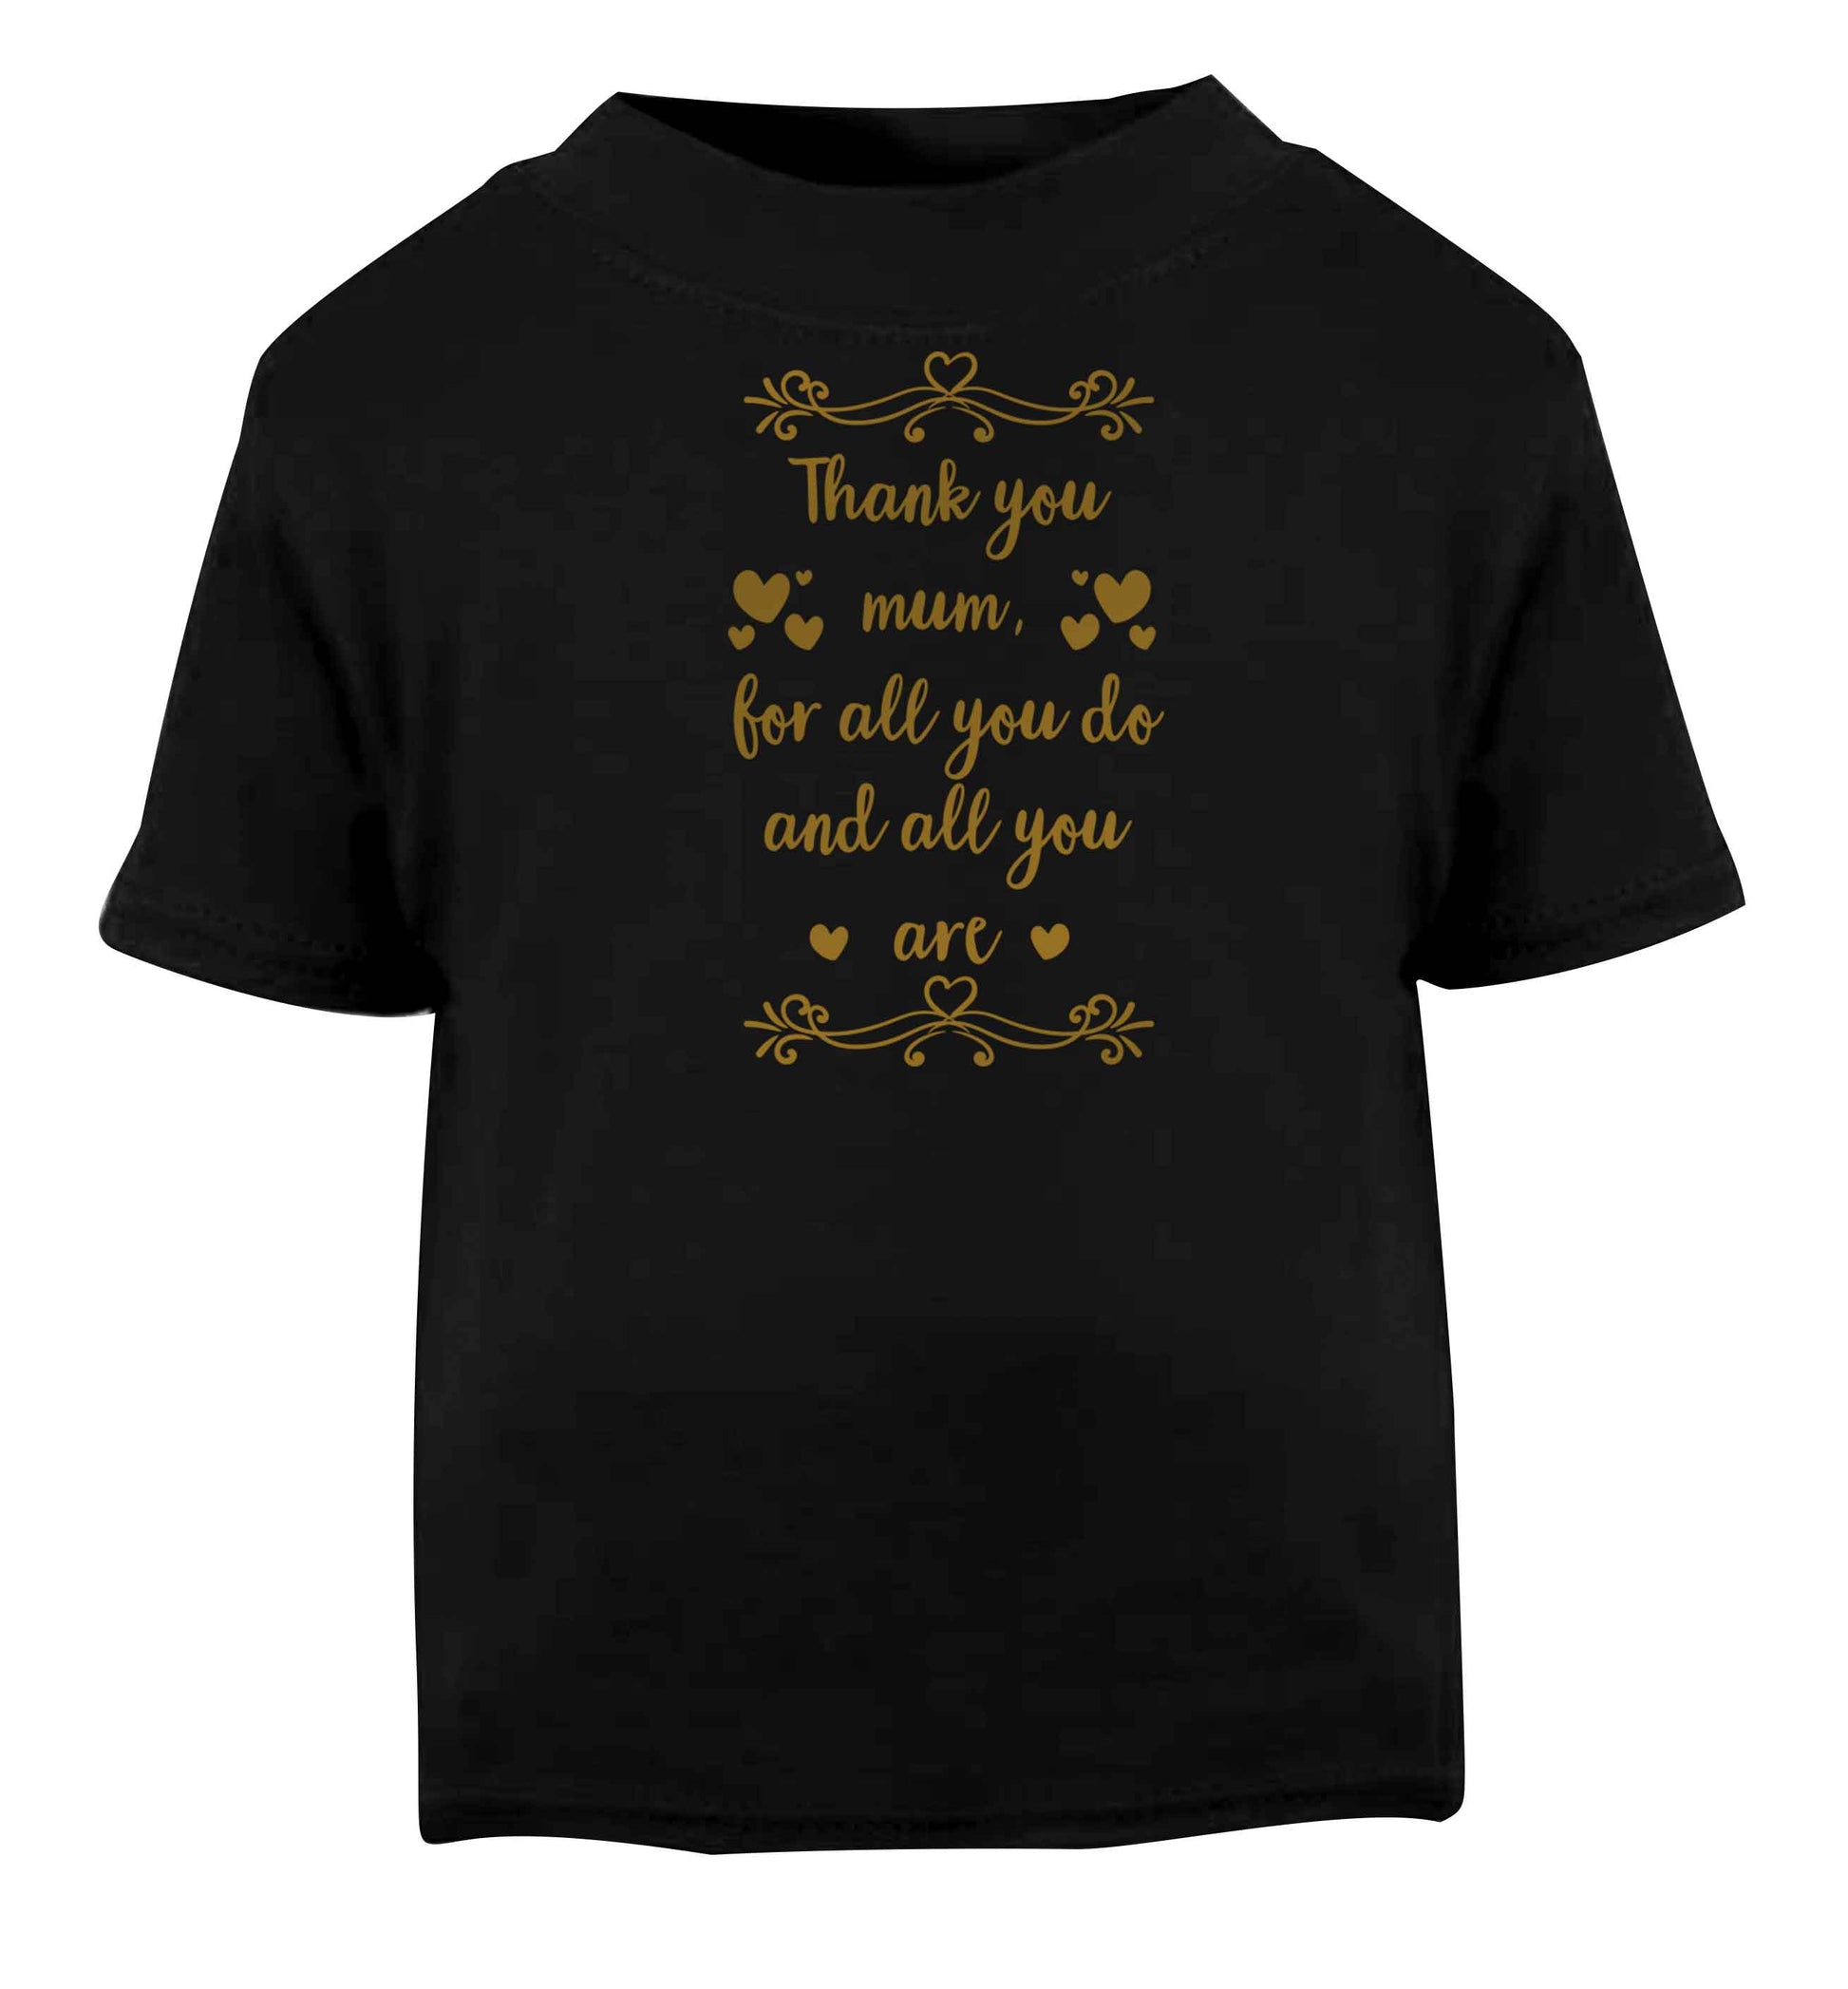 Gorgeous gifts for mums on mother's day! Thank you mum for all you do and all you are Black baby toddler Tshirt 2 years